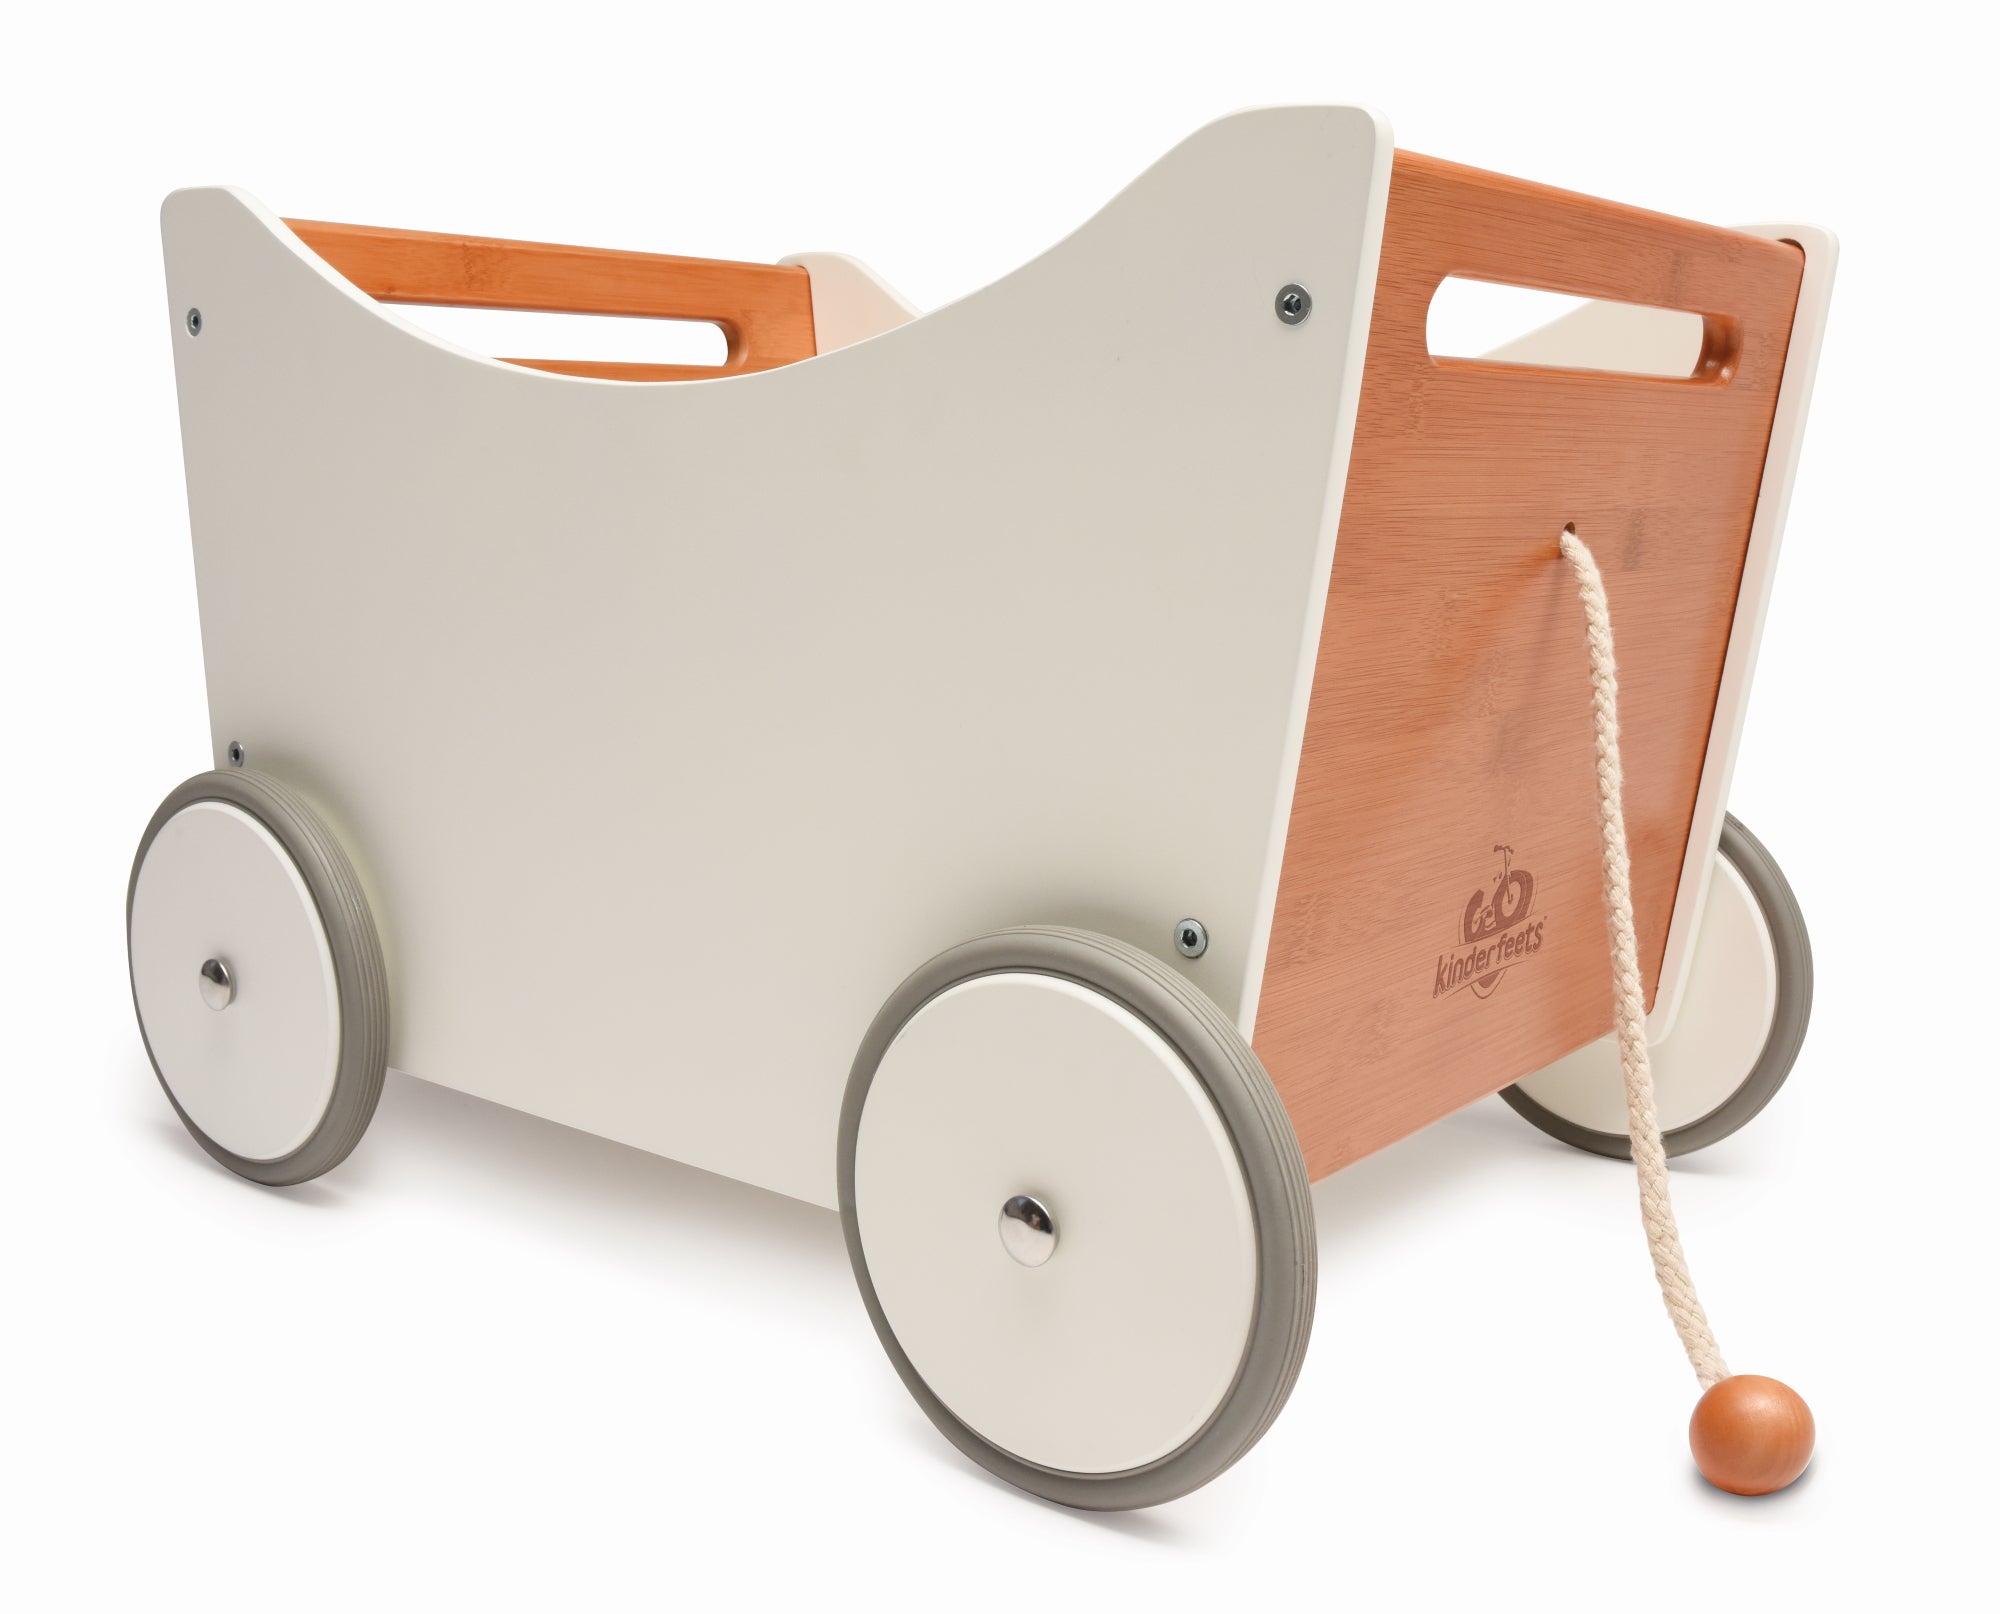 Kinderfeets baby walker - wooden toy box - toybox - toy cart - baby walkers - toddlers - toybox - bamboo kids wagon